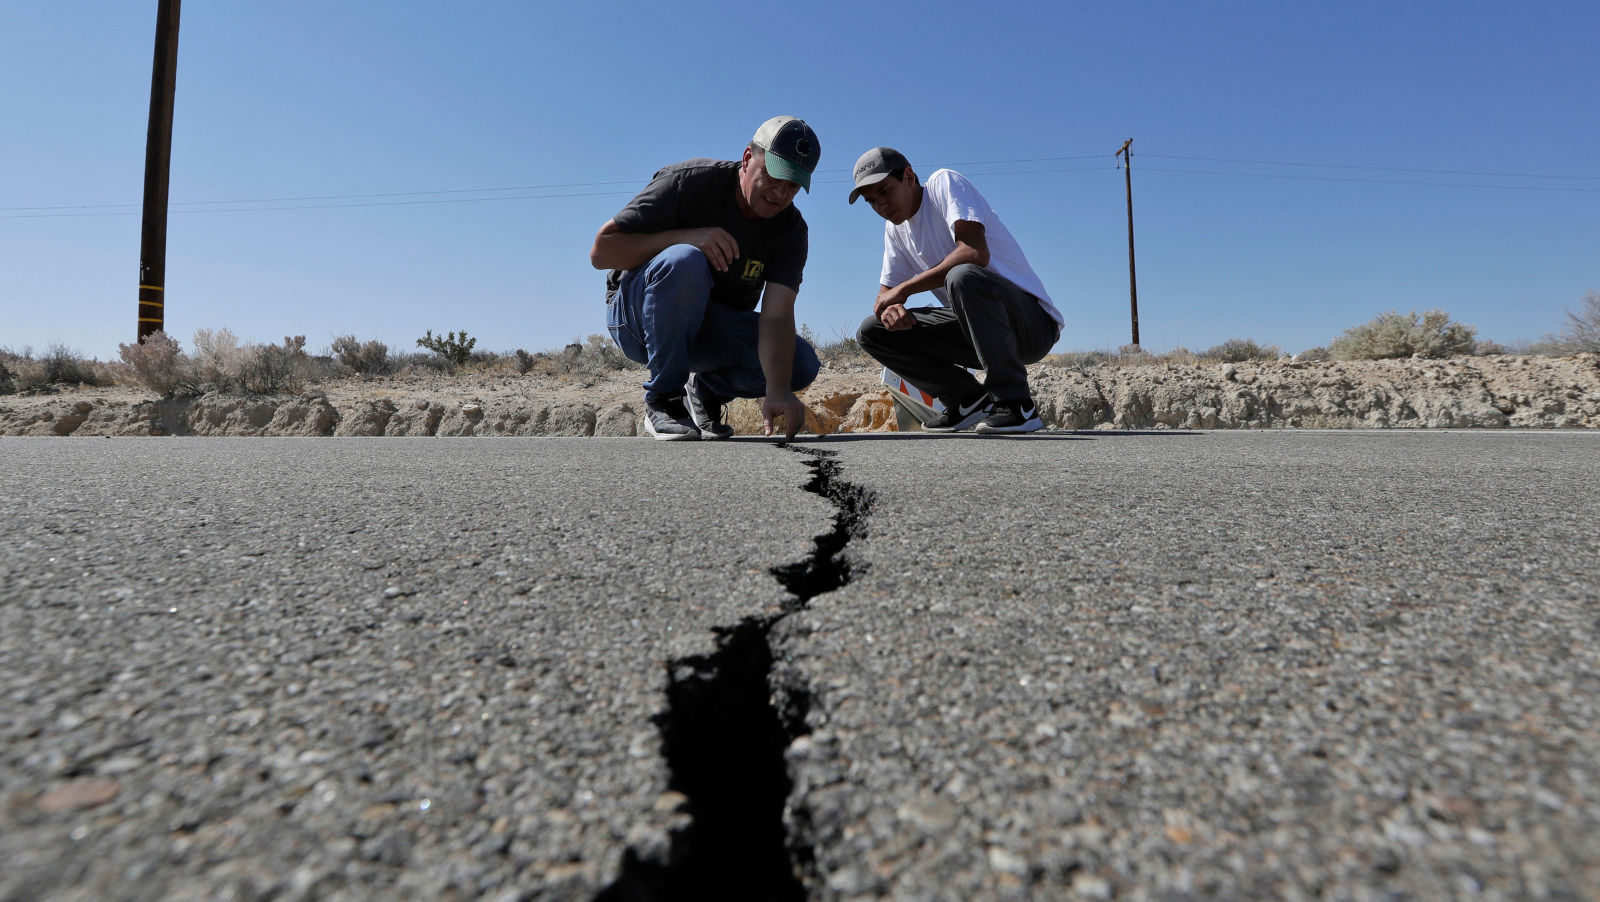 West coast residents seriously underestimate the threat of a catastrophic earthquake